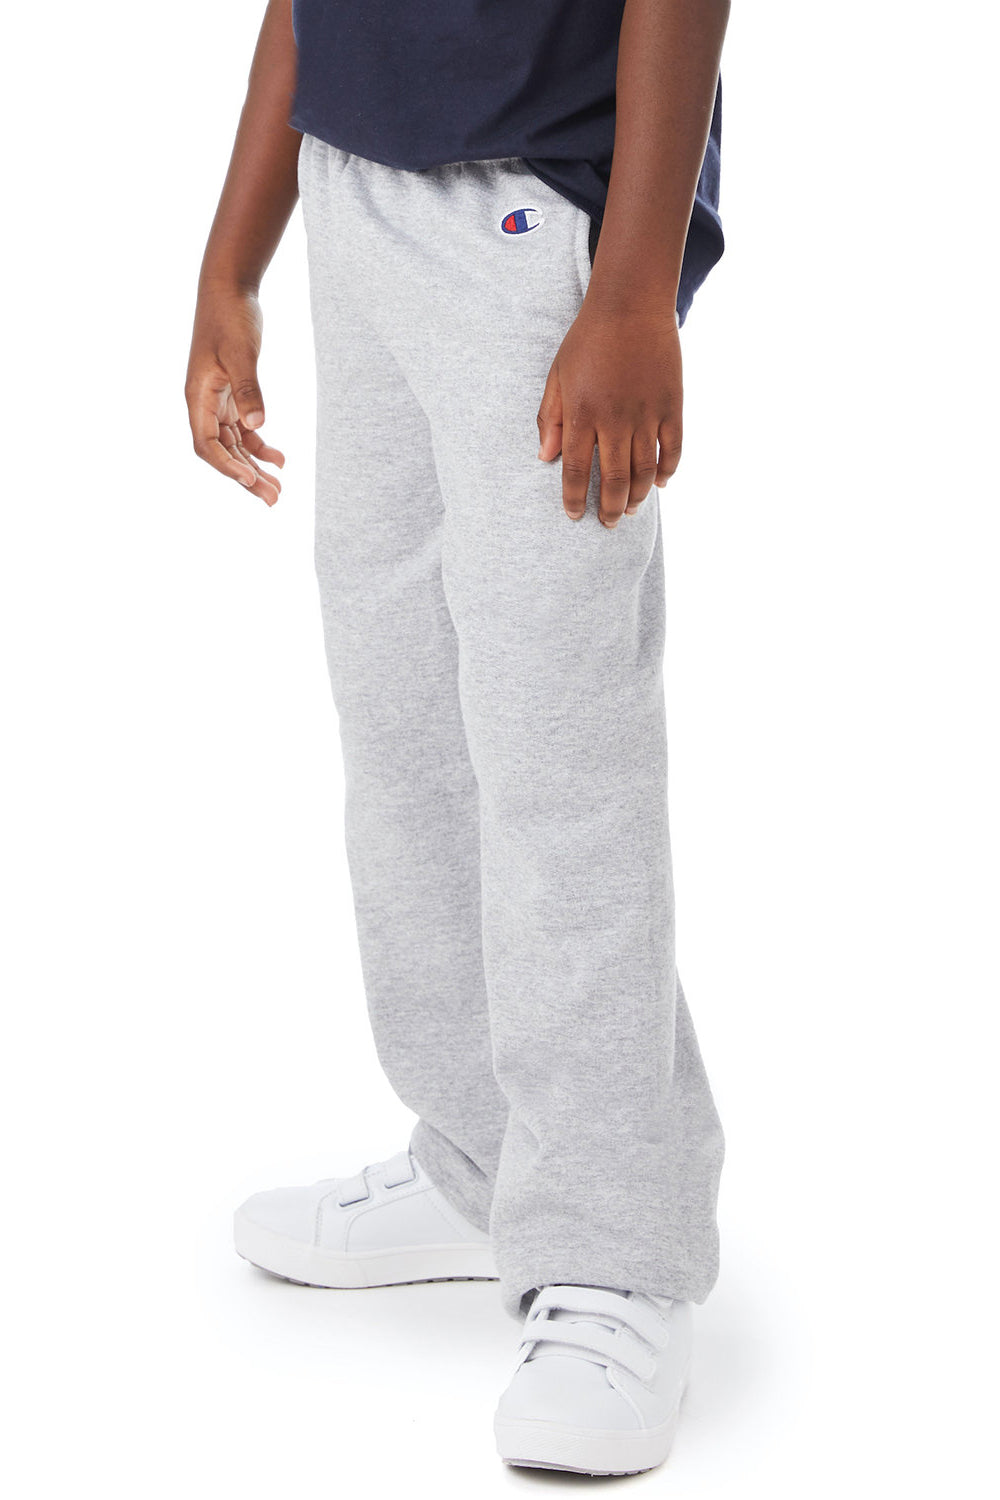 Champion P800 Powerblend® Open-Bottom Fleece Pant with Pockets